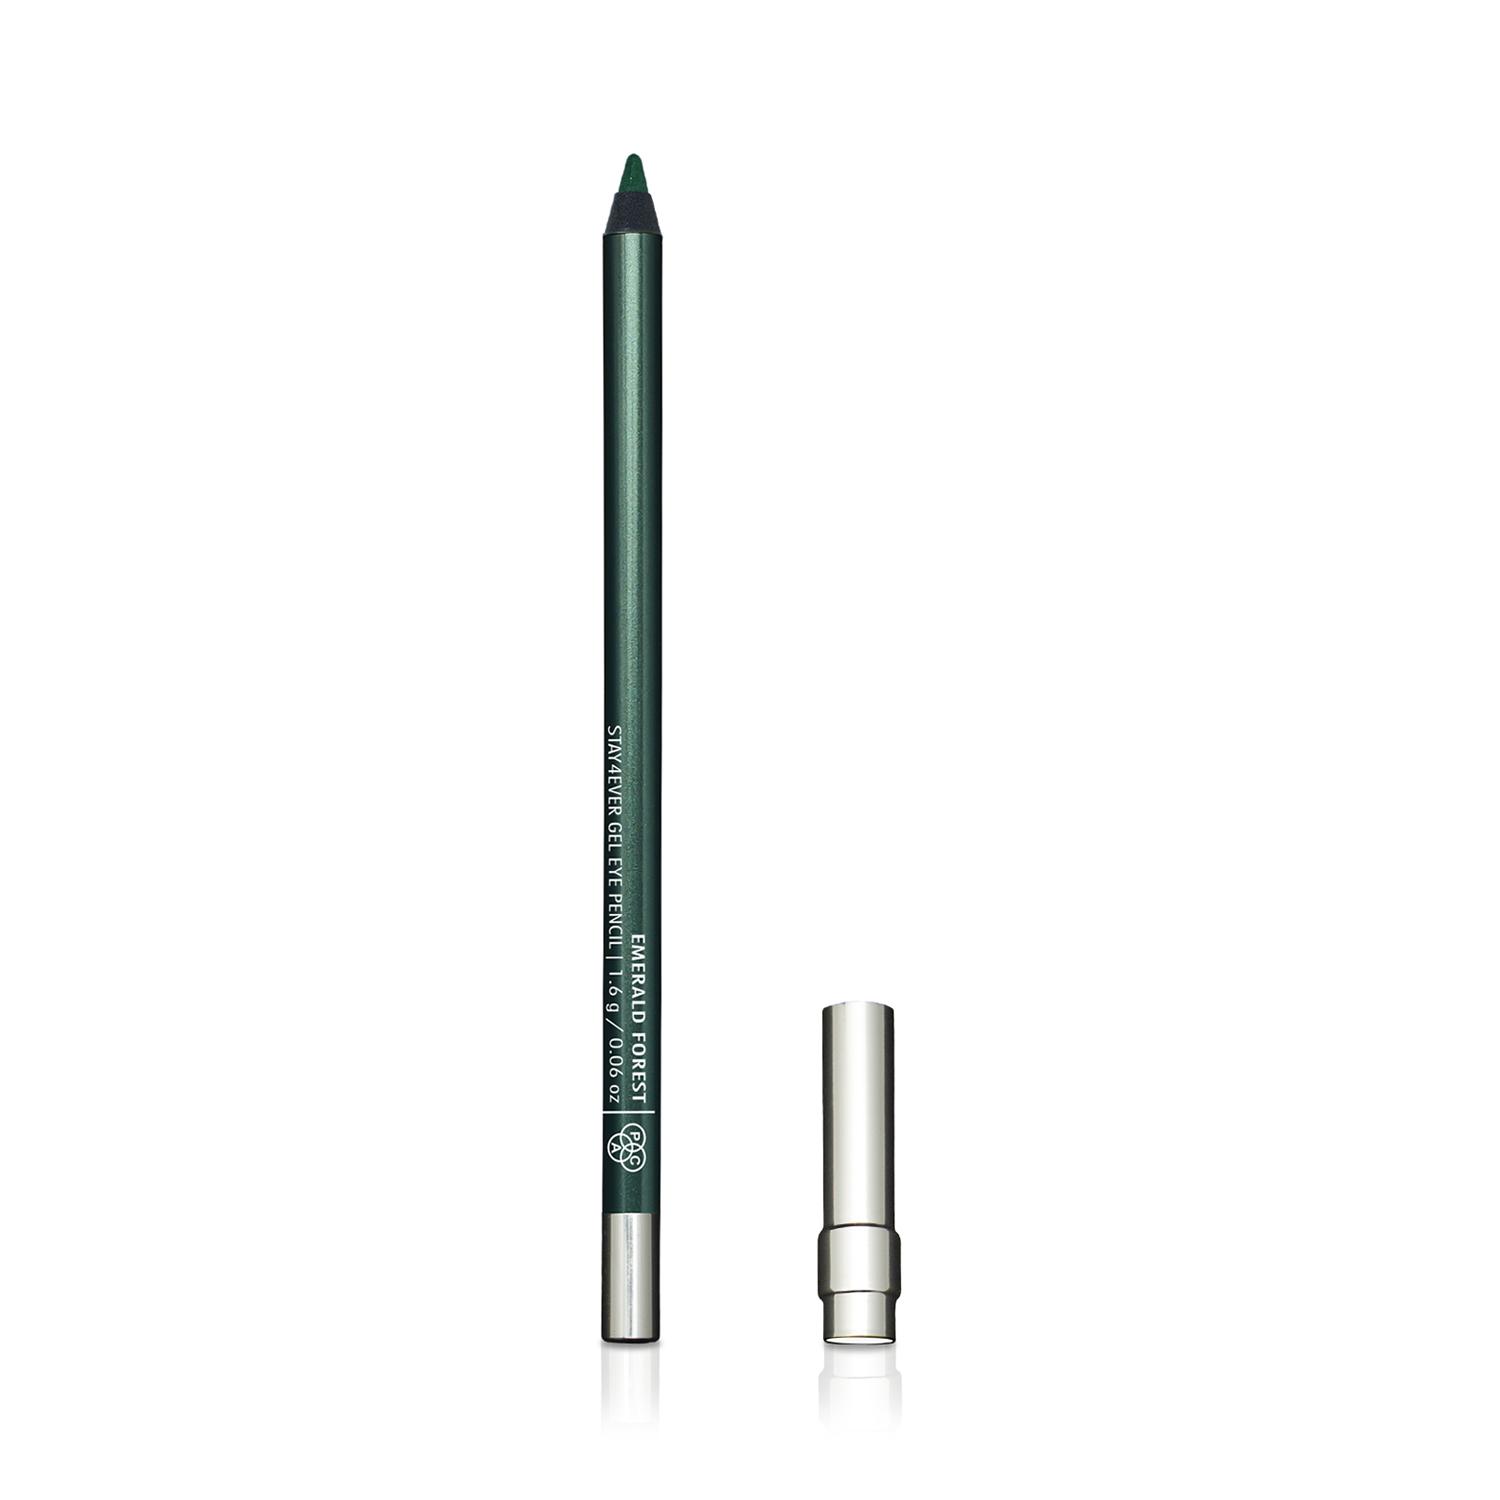 PAC | PAC Stay4Ever Gel Eye Pencil - Emerald Forest (1.6g)